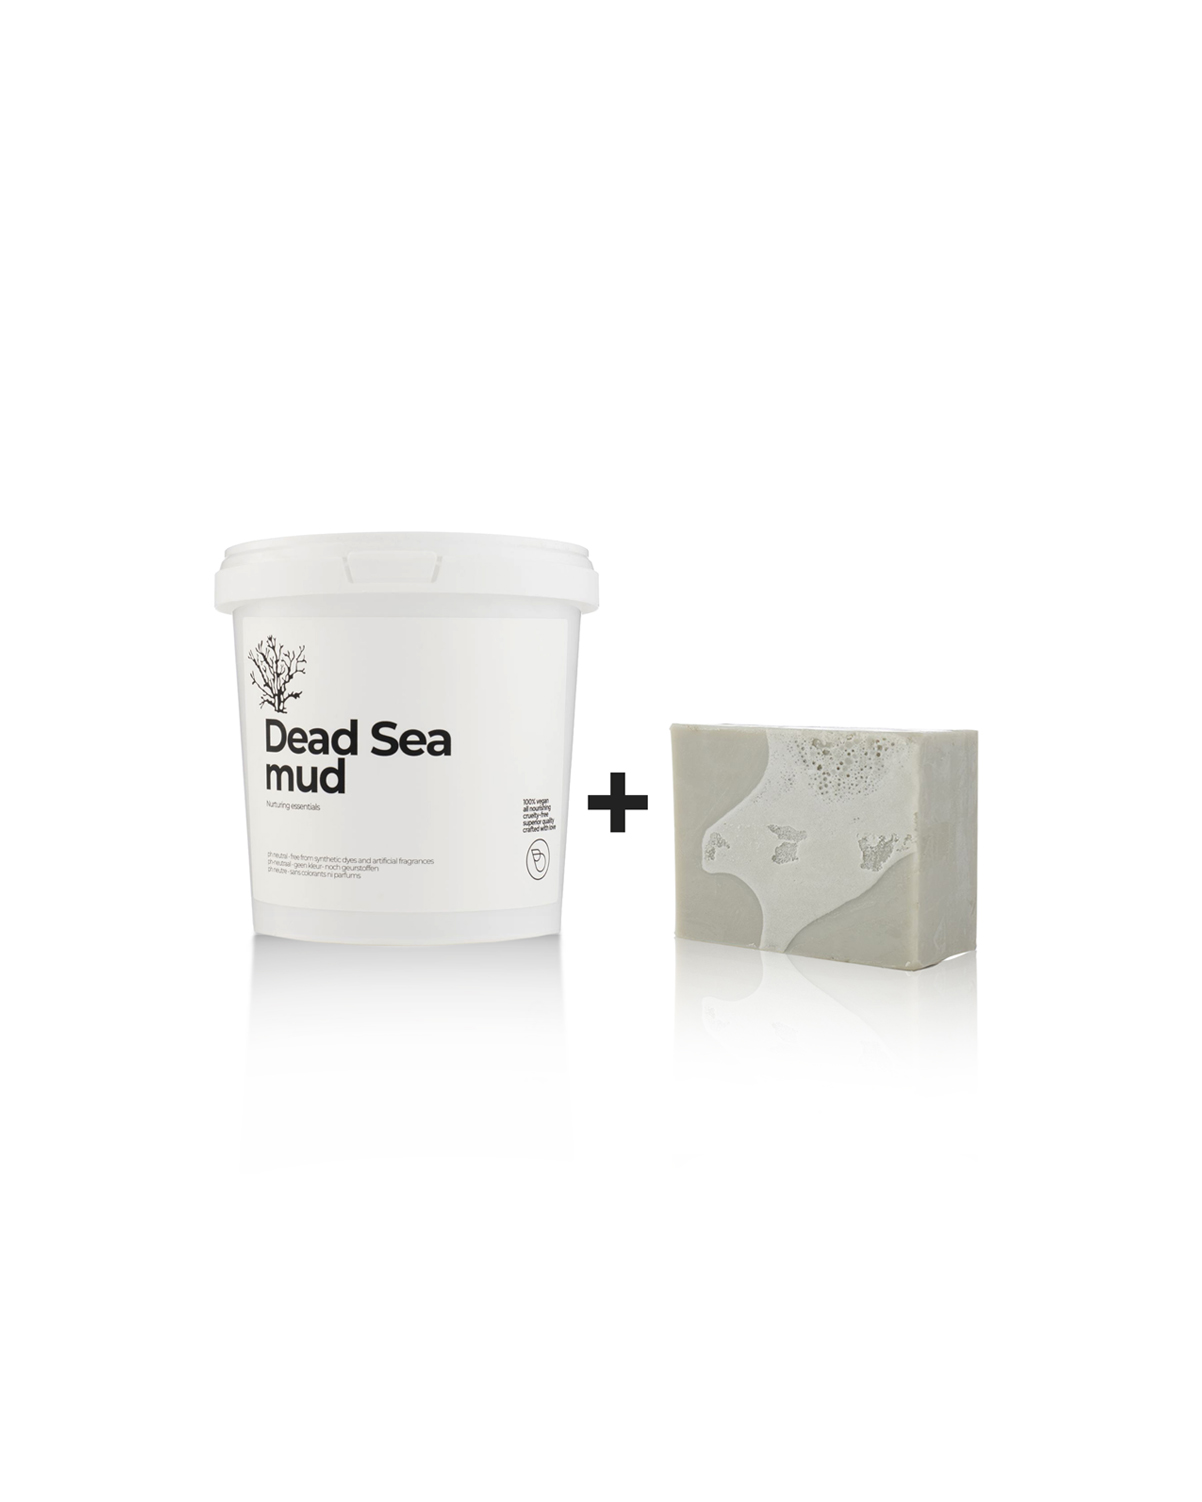 TEMPORARY COMBO PACKAGE DEAD SEA MUD AND DEAD SEA MUD SOAP


